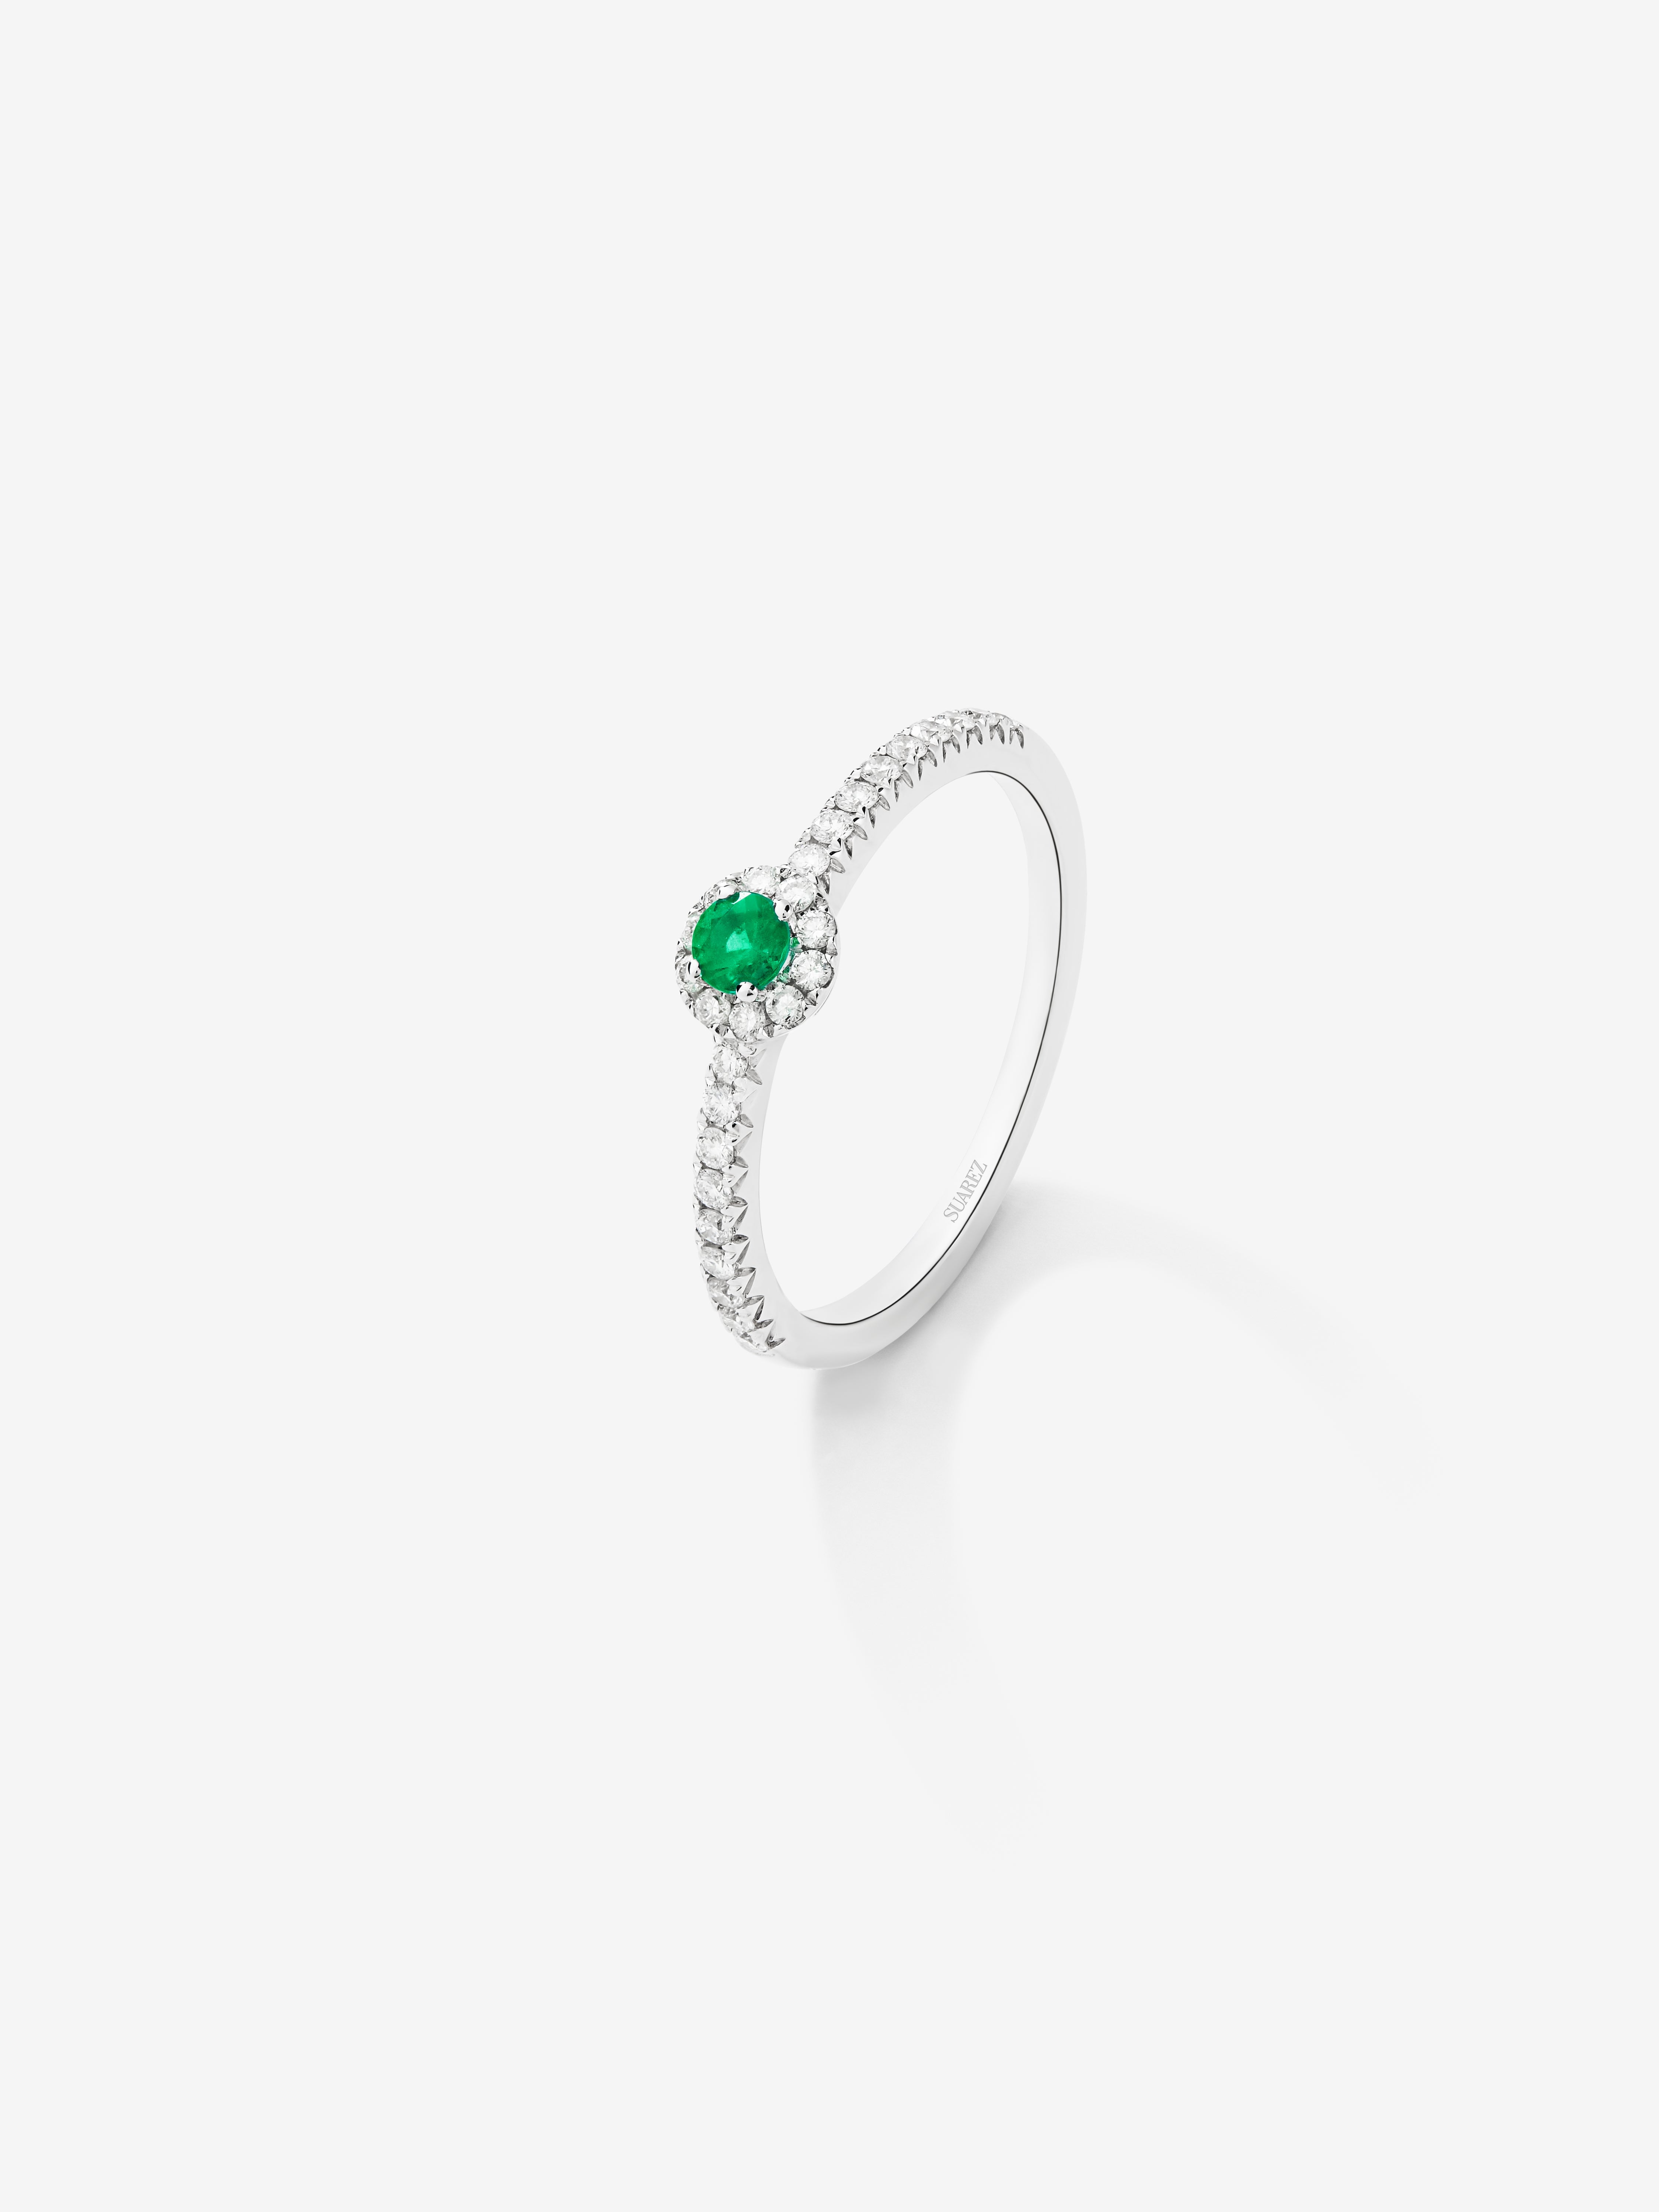 18K white gold ring with brilliant-cut emerald of 0.15 cts and arm and border of 26 brilliant-cut diamonds with a total of 0.27 cts